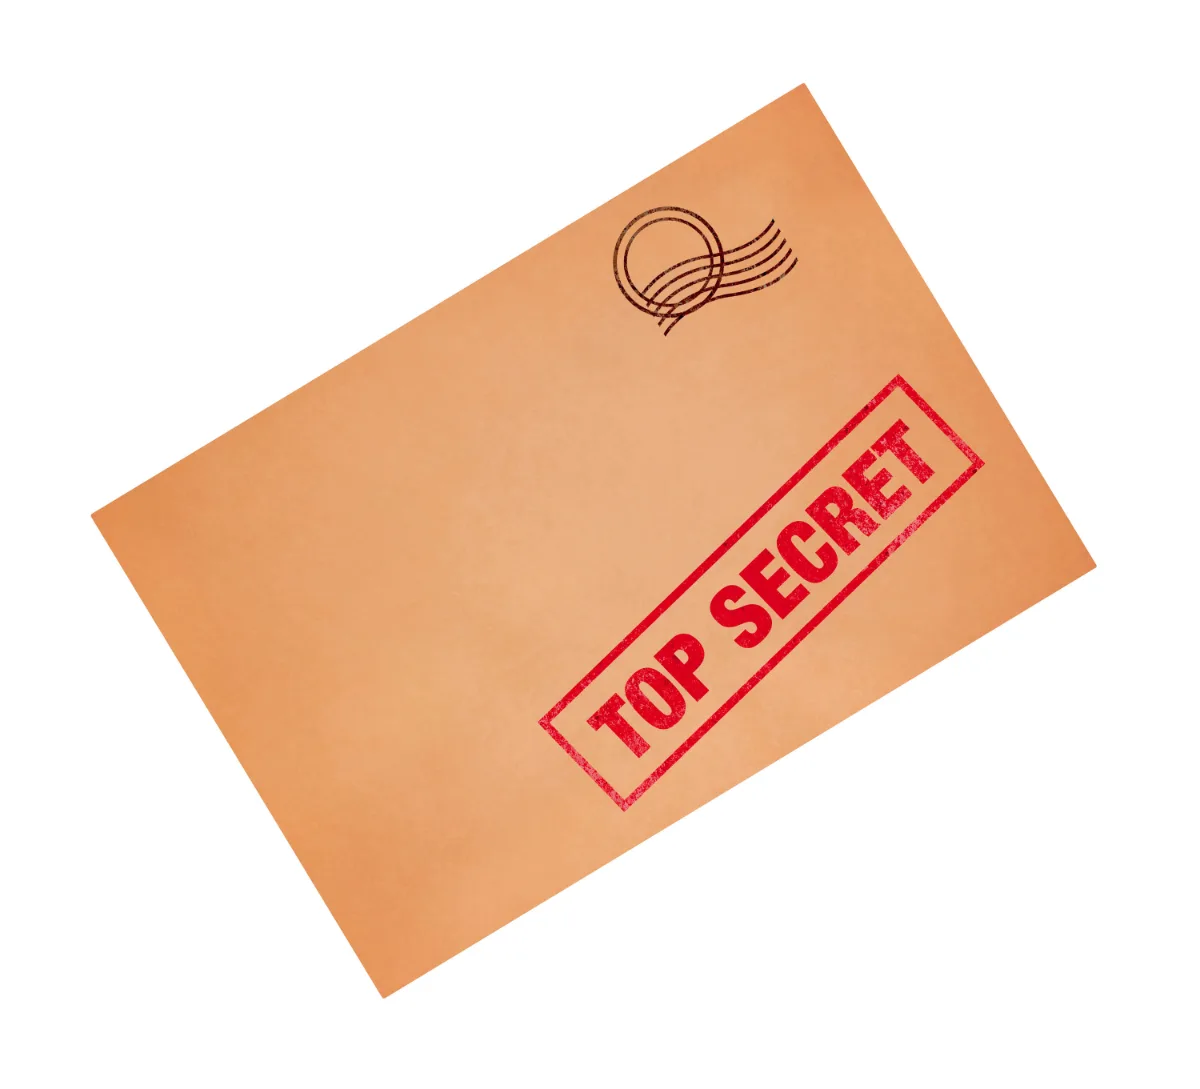 A brown envelope with the word top secret on it, containing legal documents for a misdemeanor case, requiring immediate attention from a lawyer.